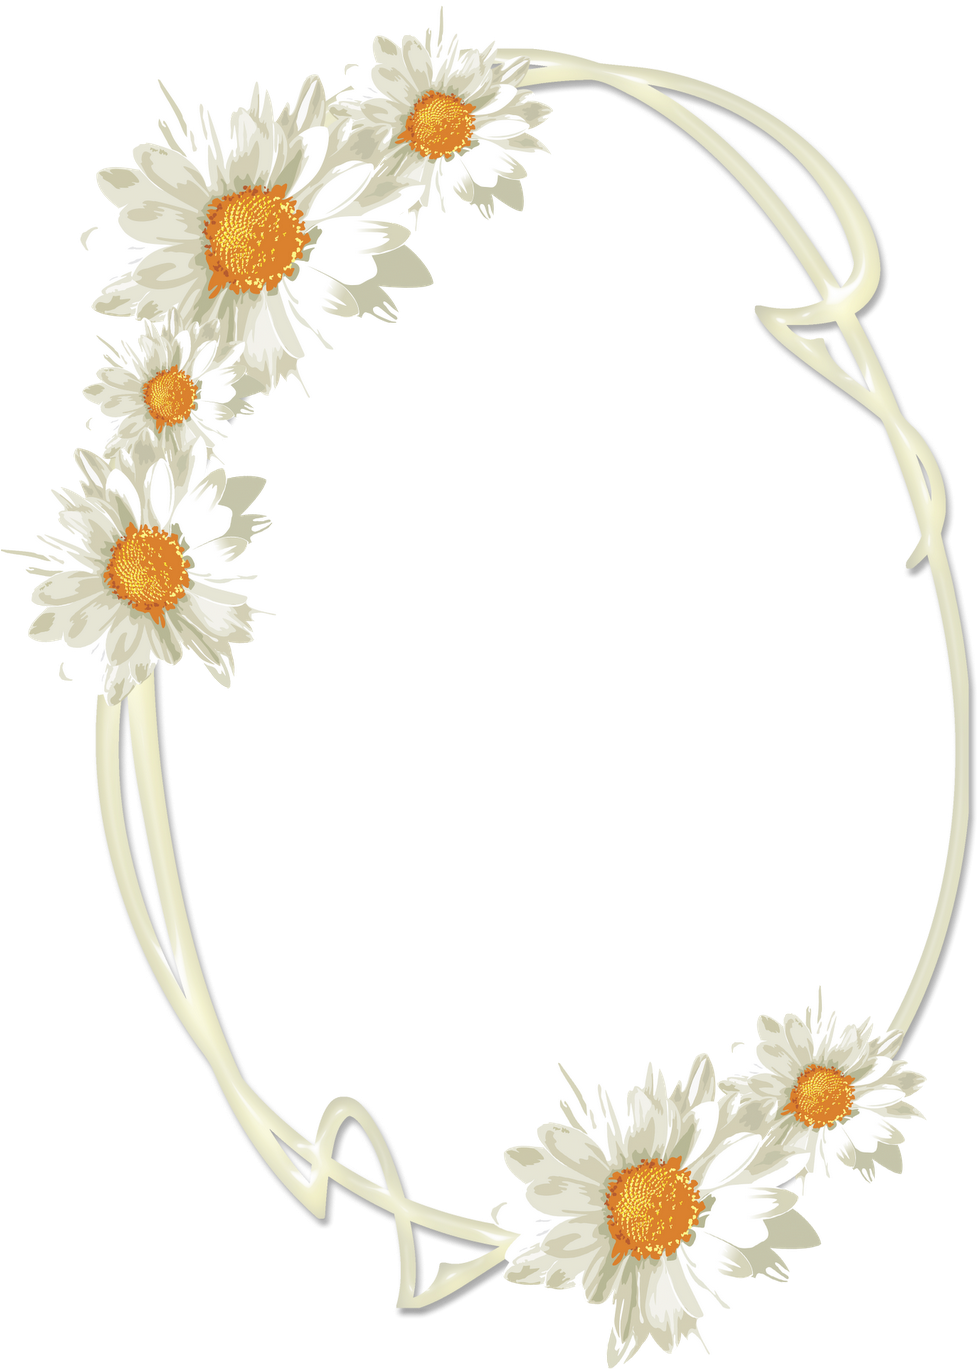 Daisy Chain Frame Design PNG